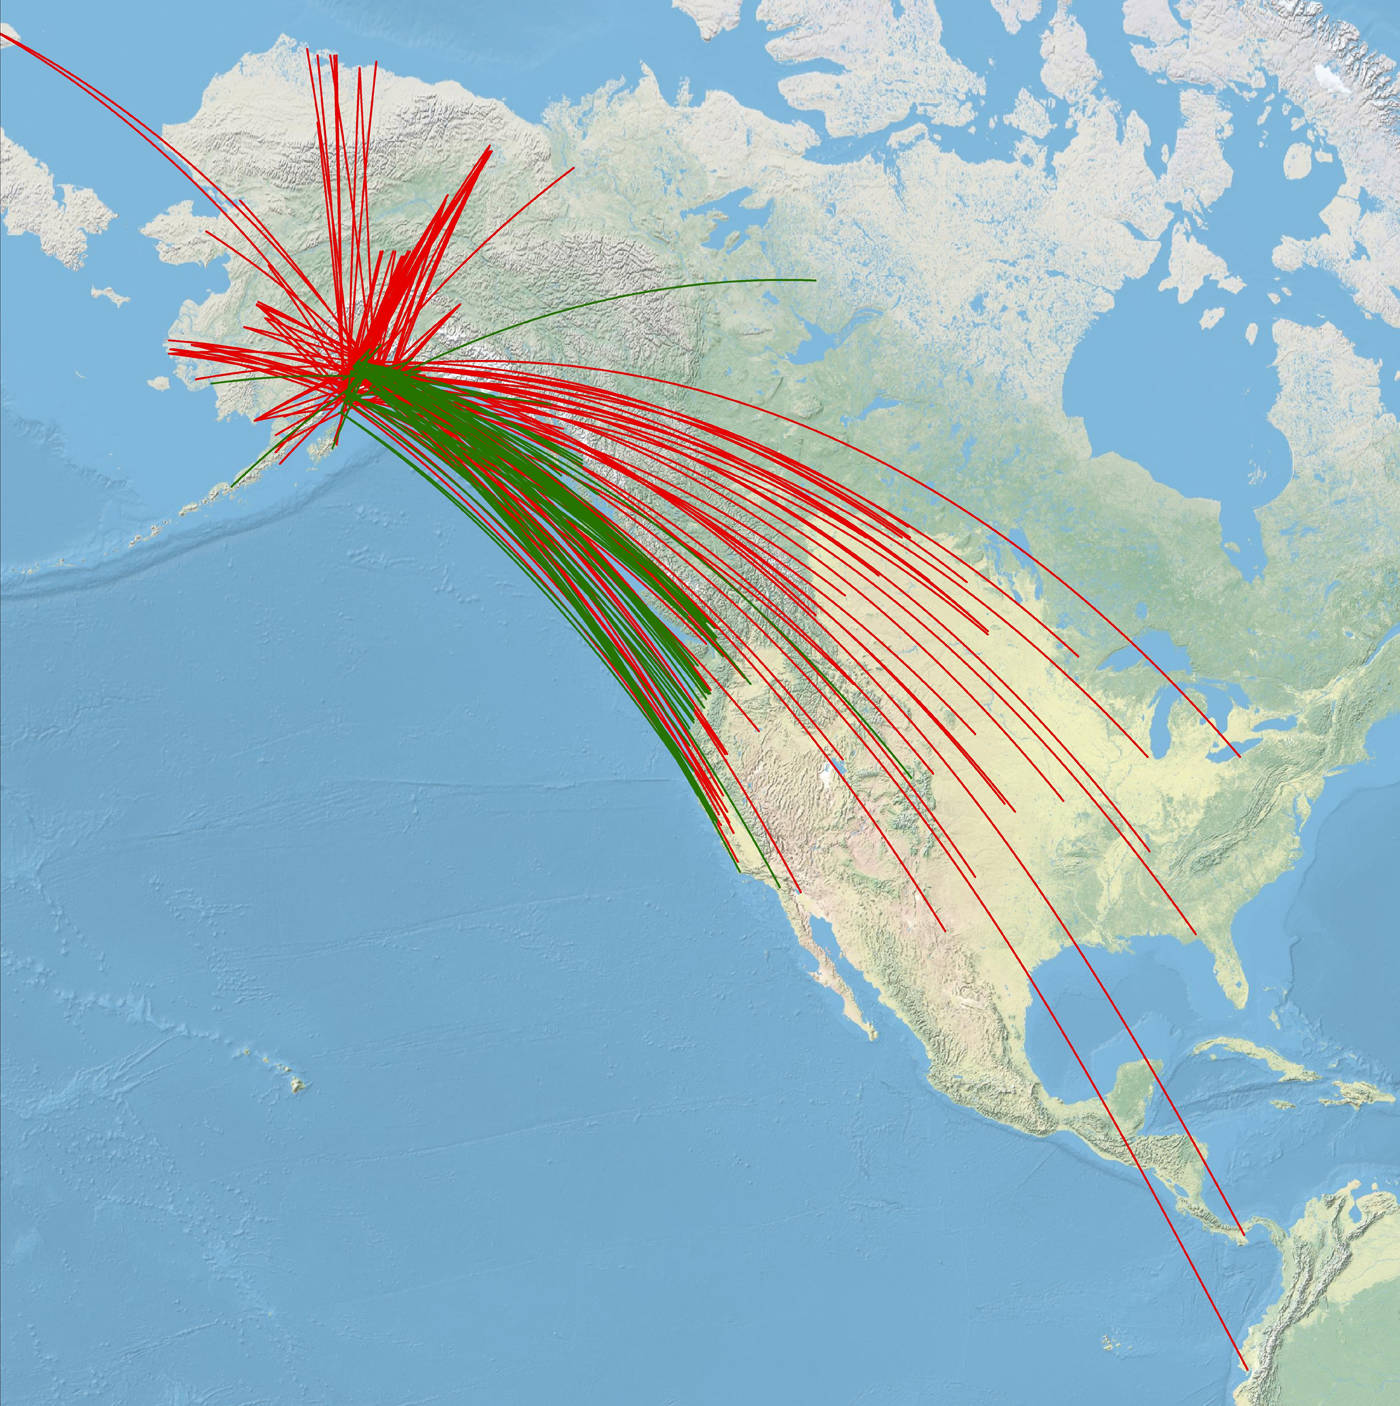 Records of migratory birds either banded on the Kenai Peninsula and recovered elsewhere (green) or banded elsewhere and recovered on the peninsula (red). Data from USGS Bird Banding Laboratory.